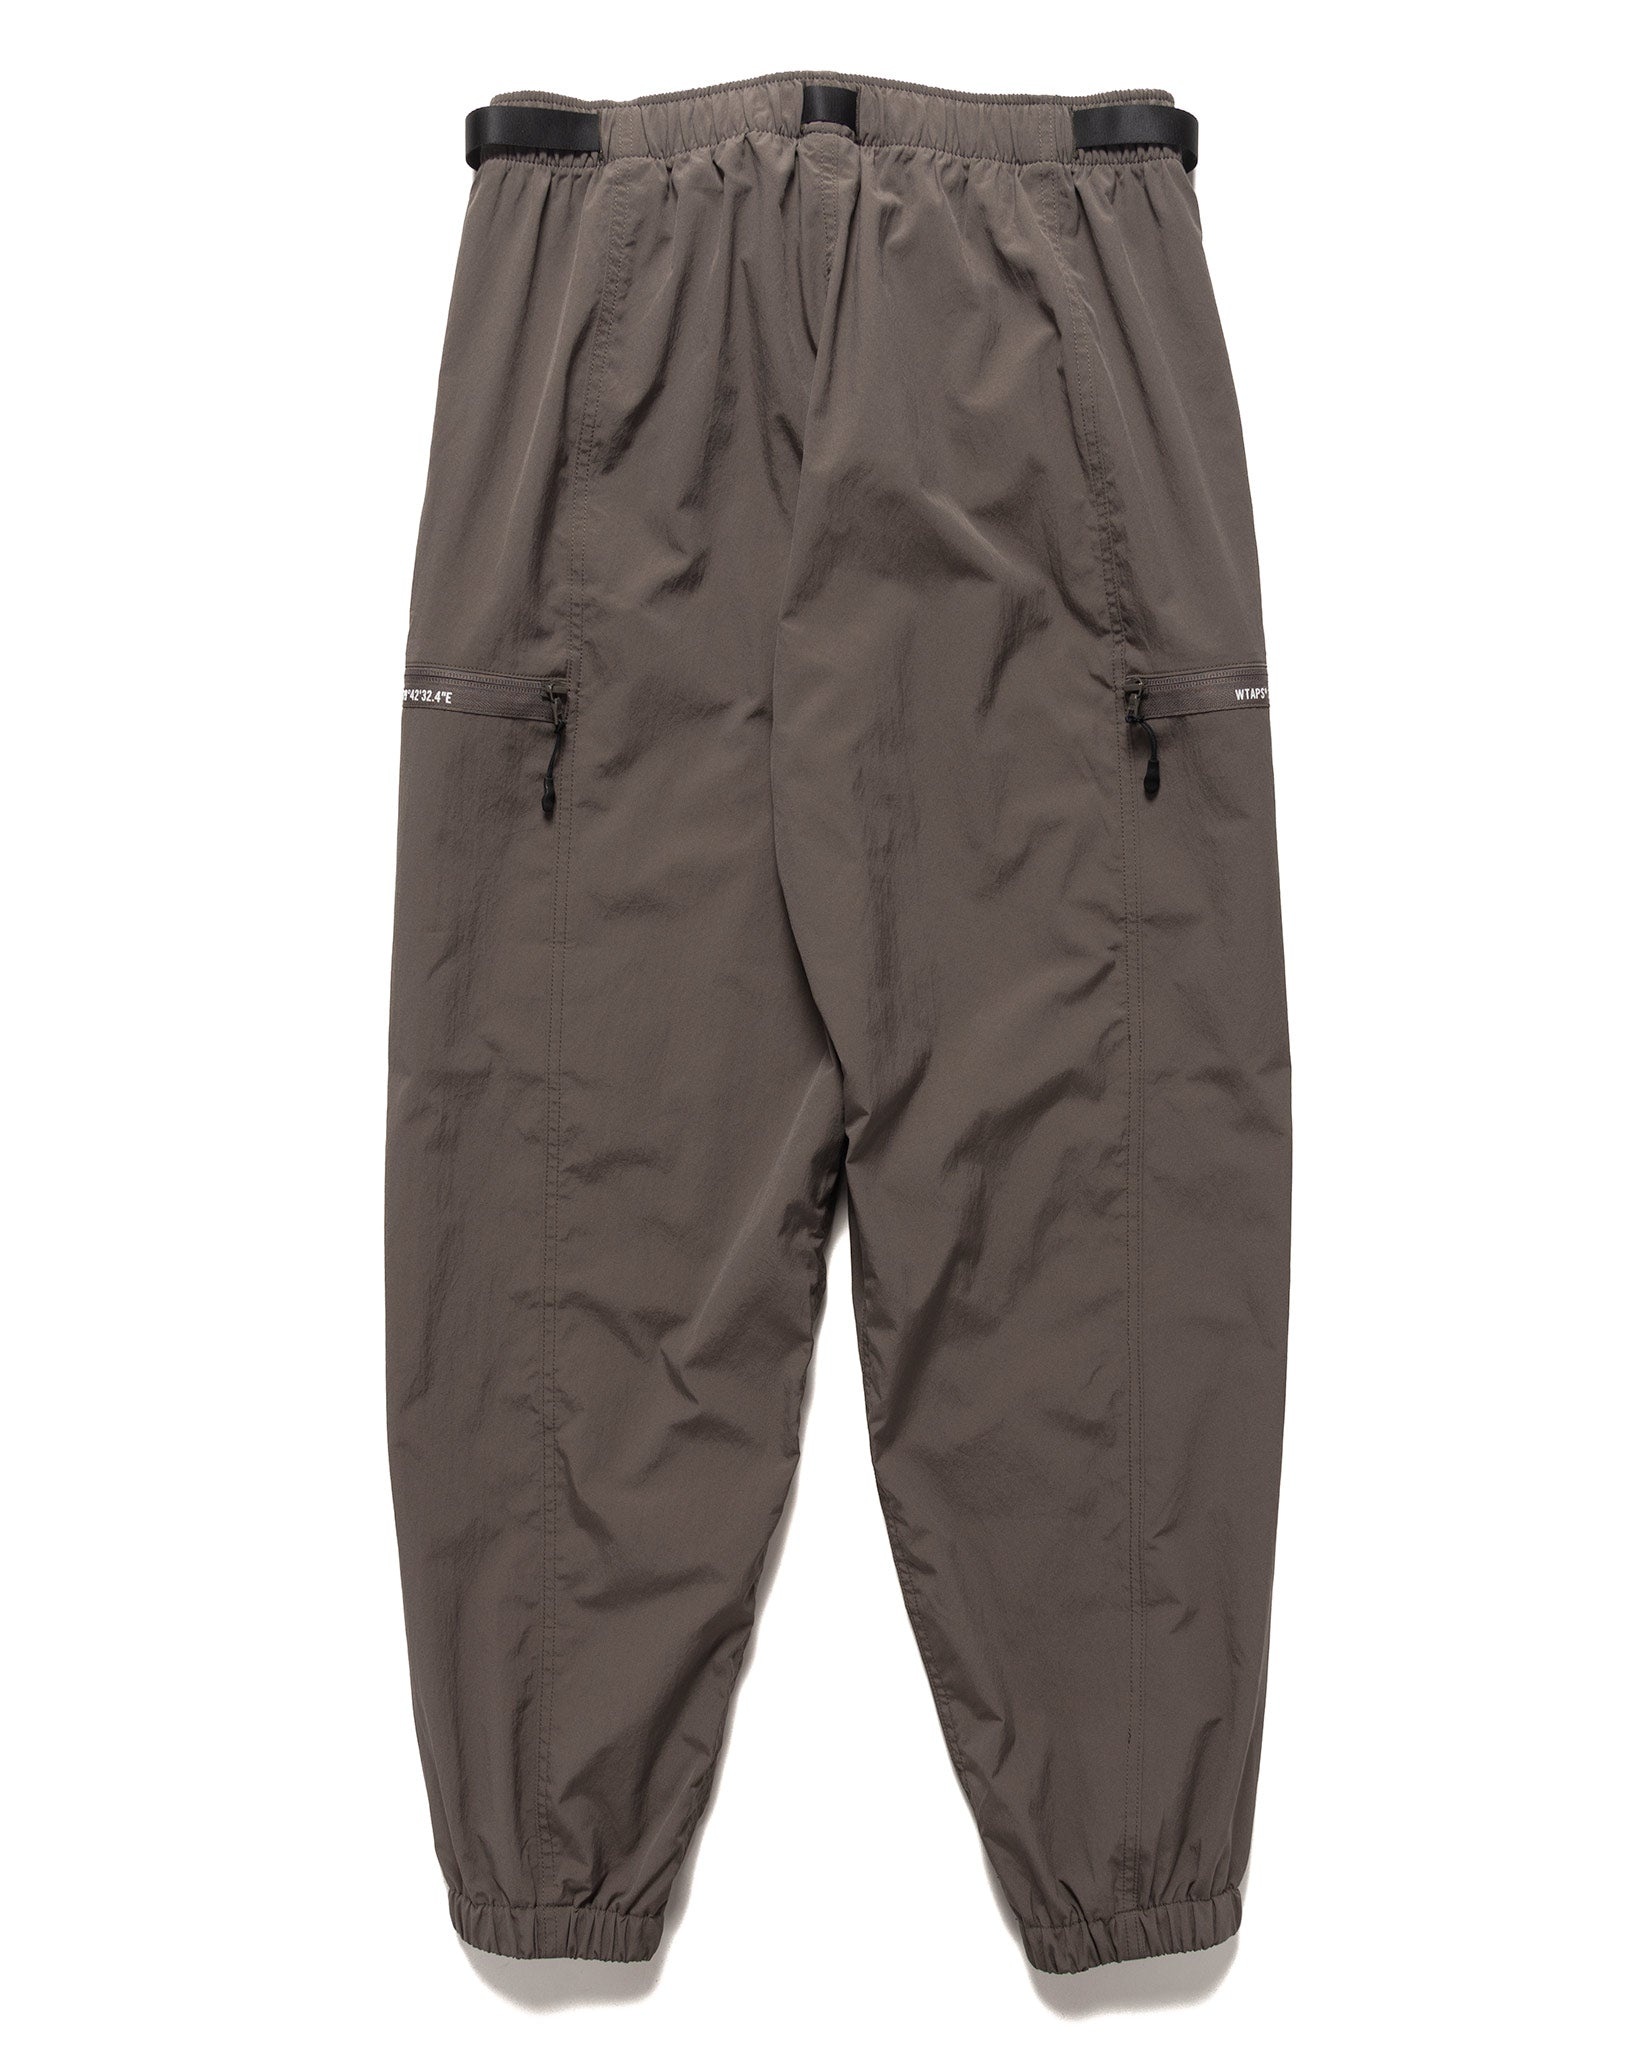 SPST2002 / Trousers / Poly. Tussah Greige - 5